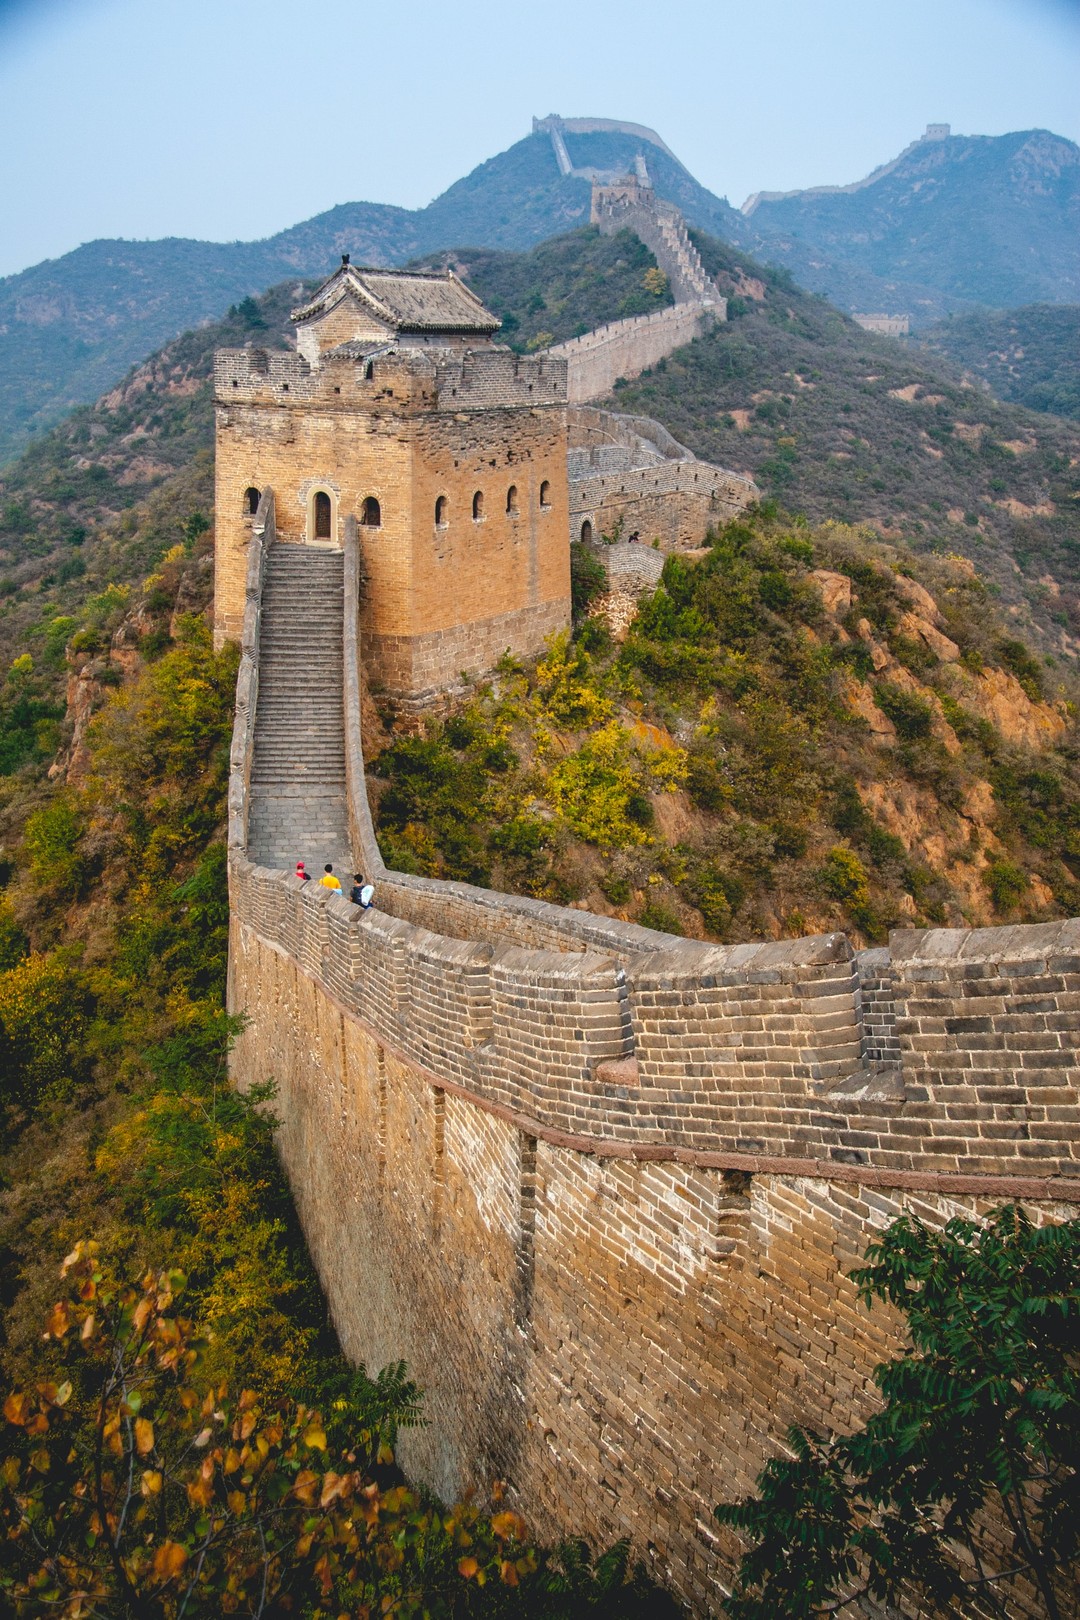 Great Wall of China: One of the best romantic getaways for couples who love culture.